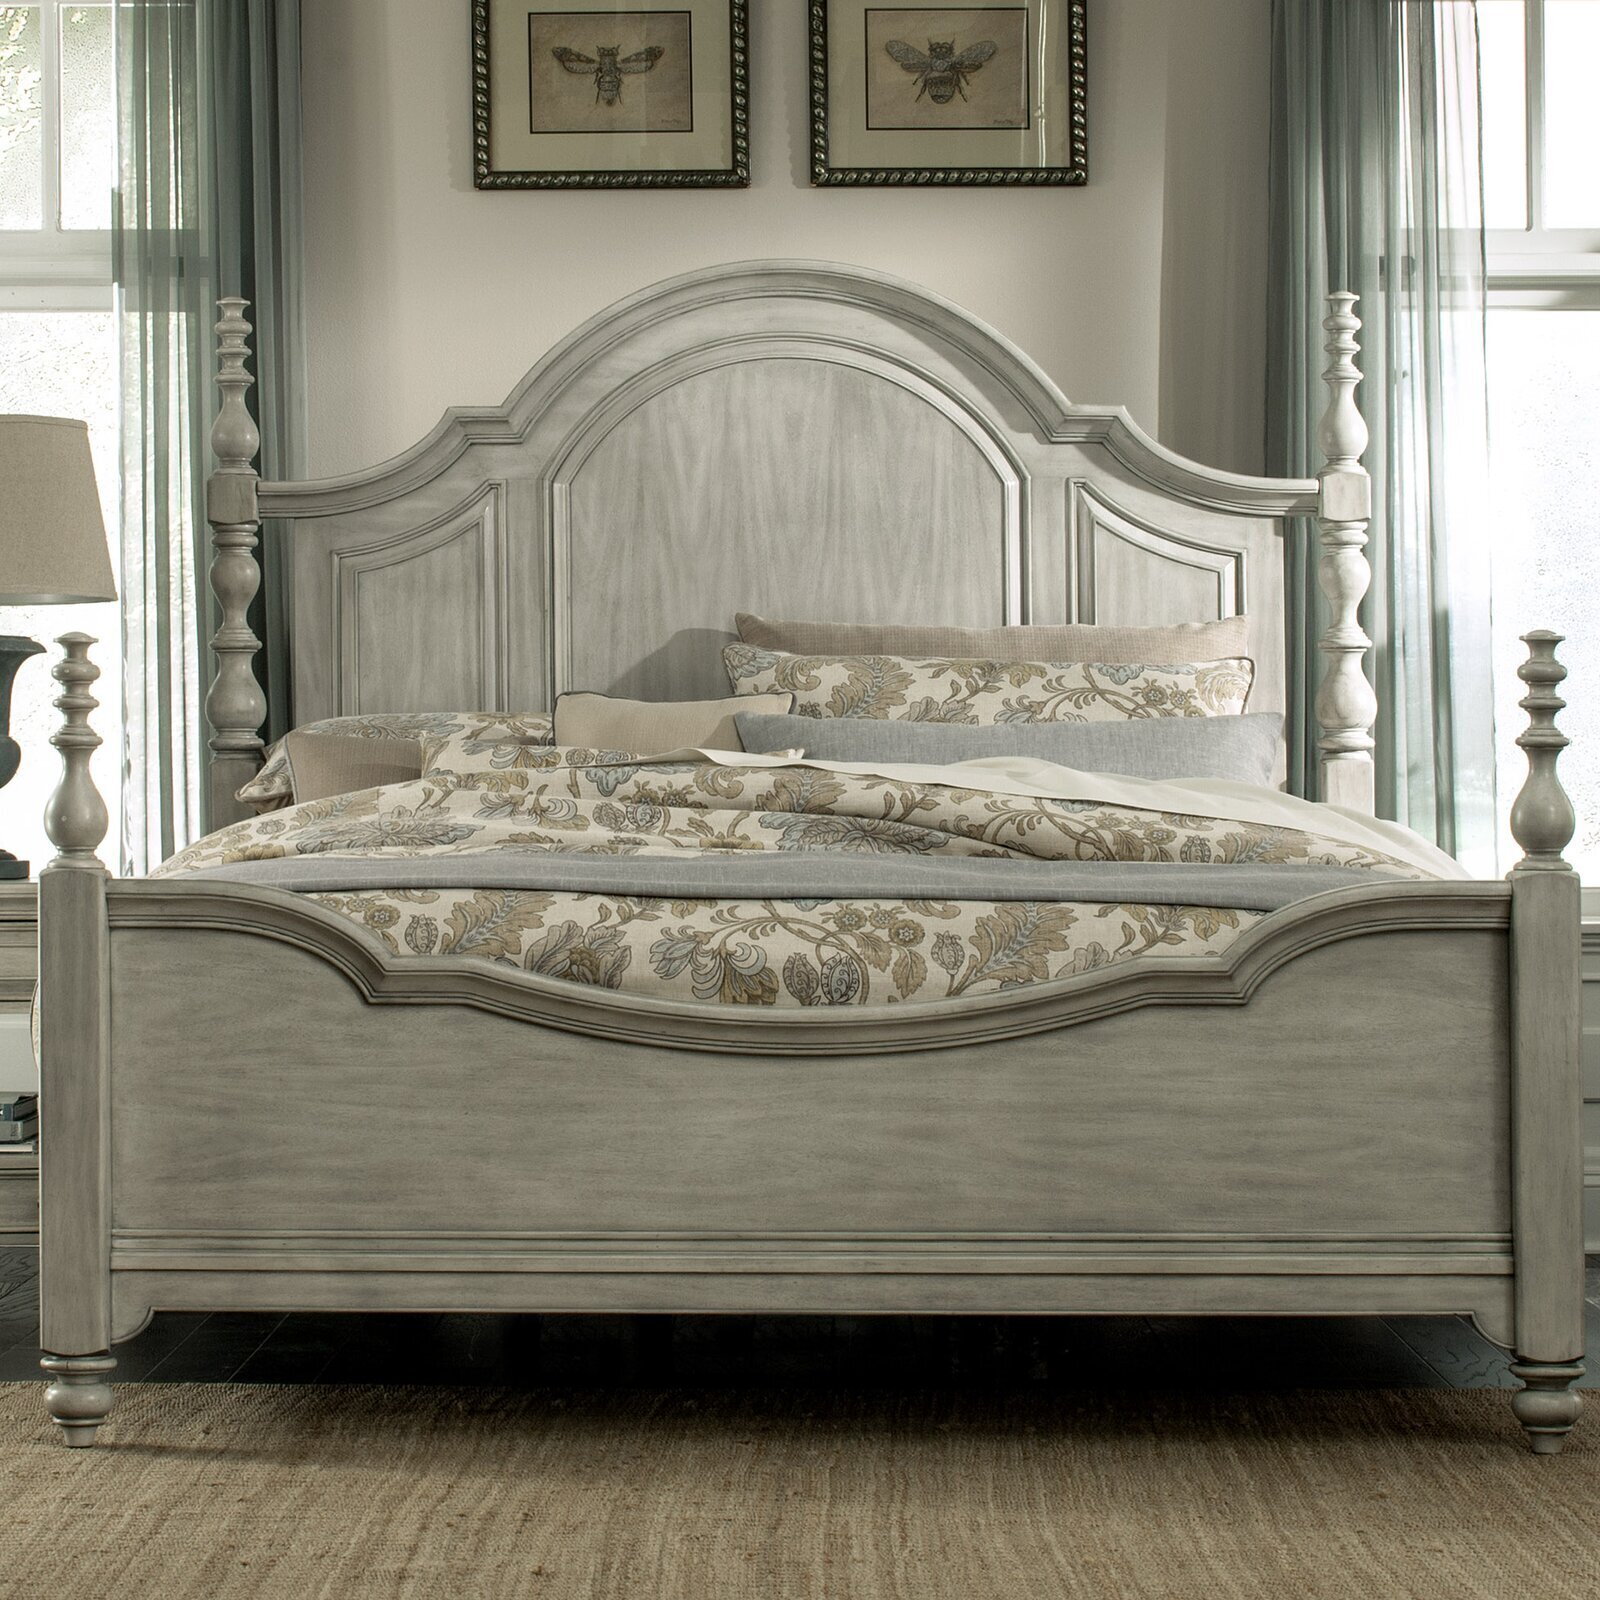 Antique Gray 4 poster Bed 